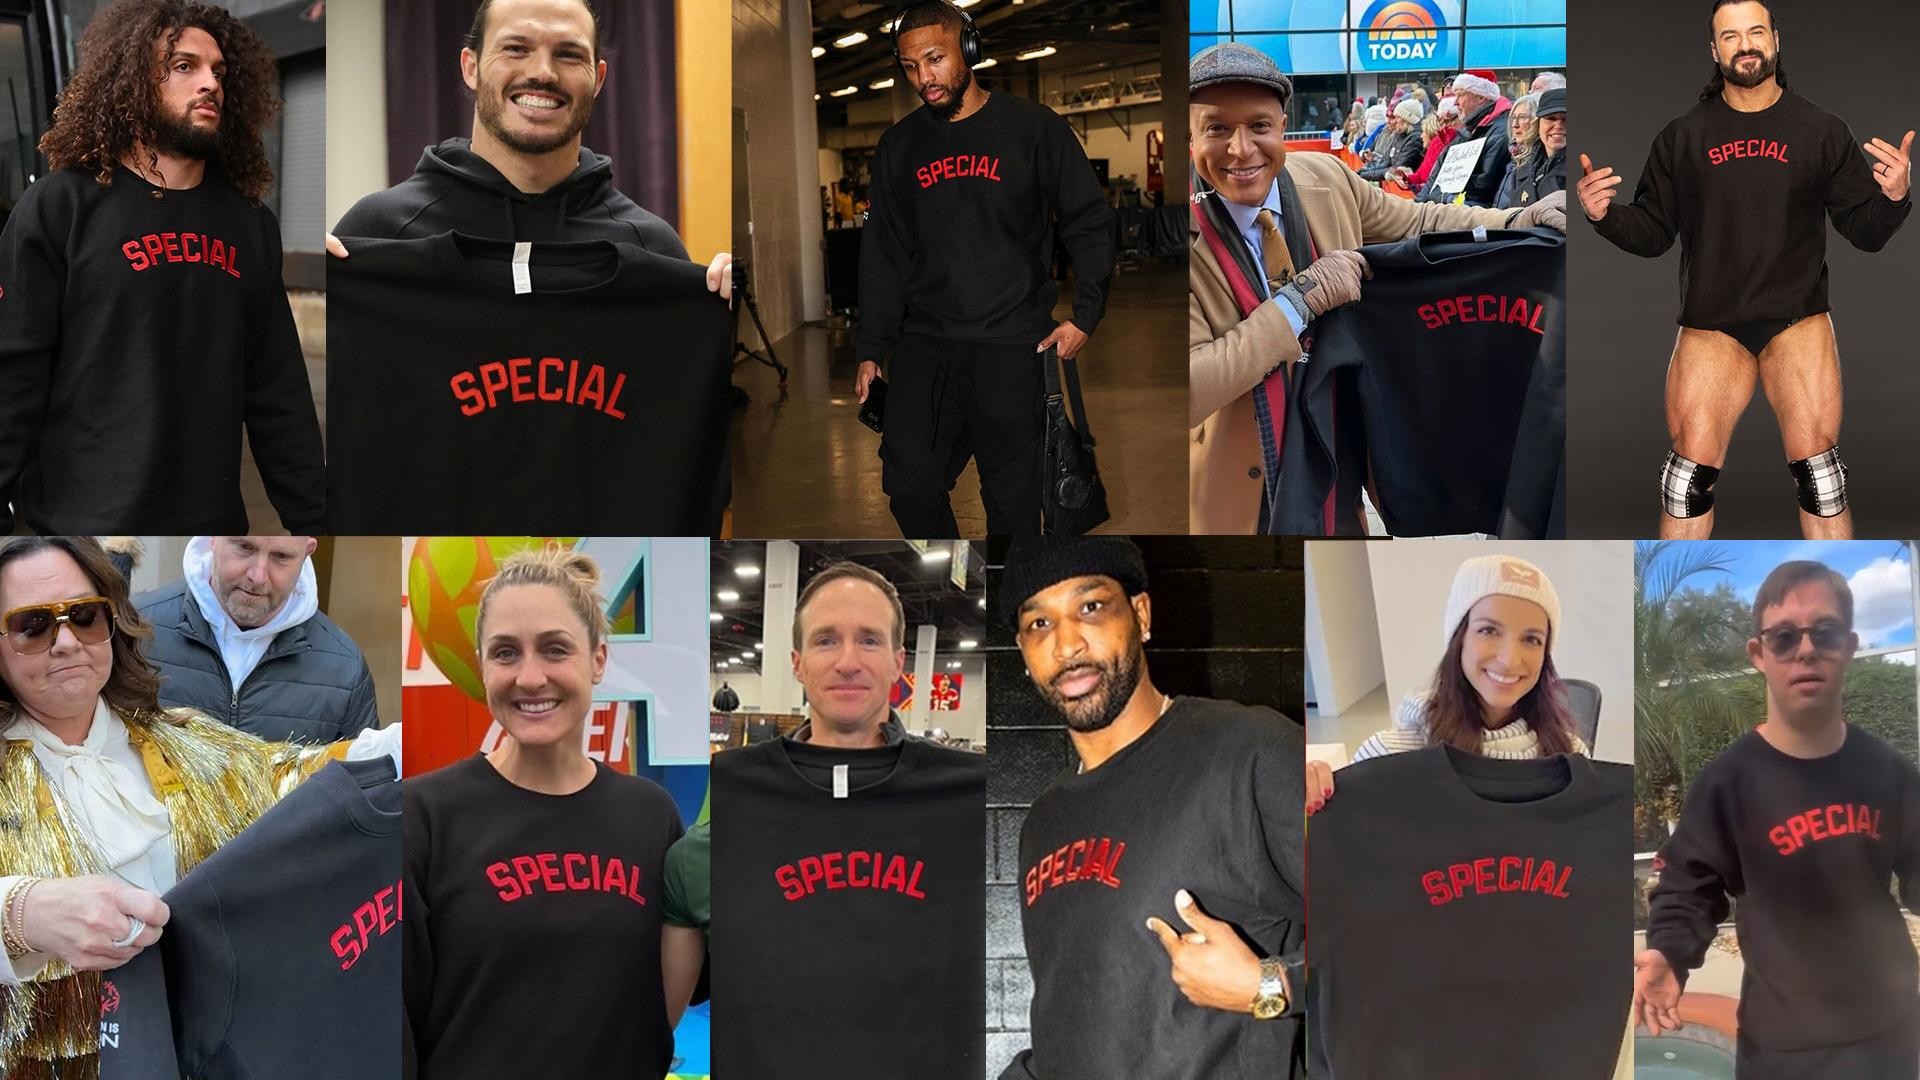 SPECIAL OLYMPICS FIGHTS STIGMA AROUND THE WORD 'SPECIAL' | Entry | THE WORK